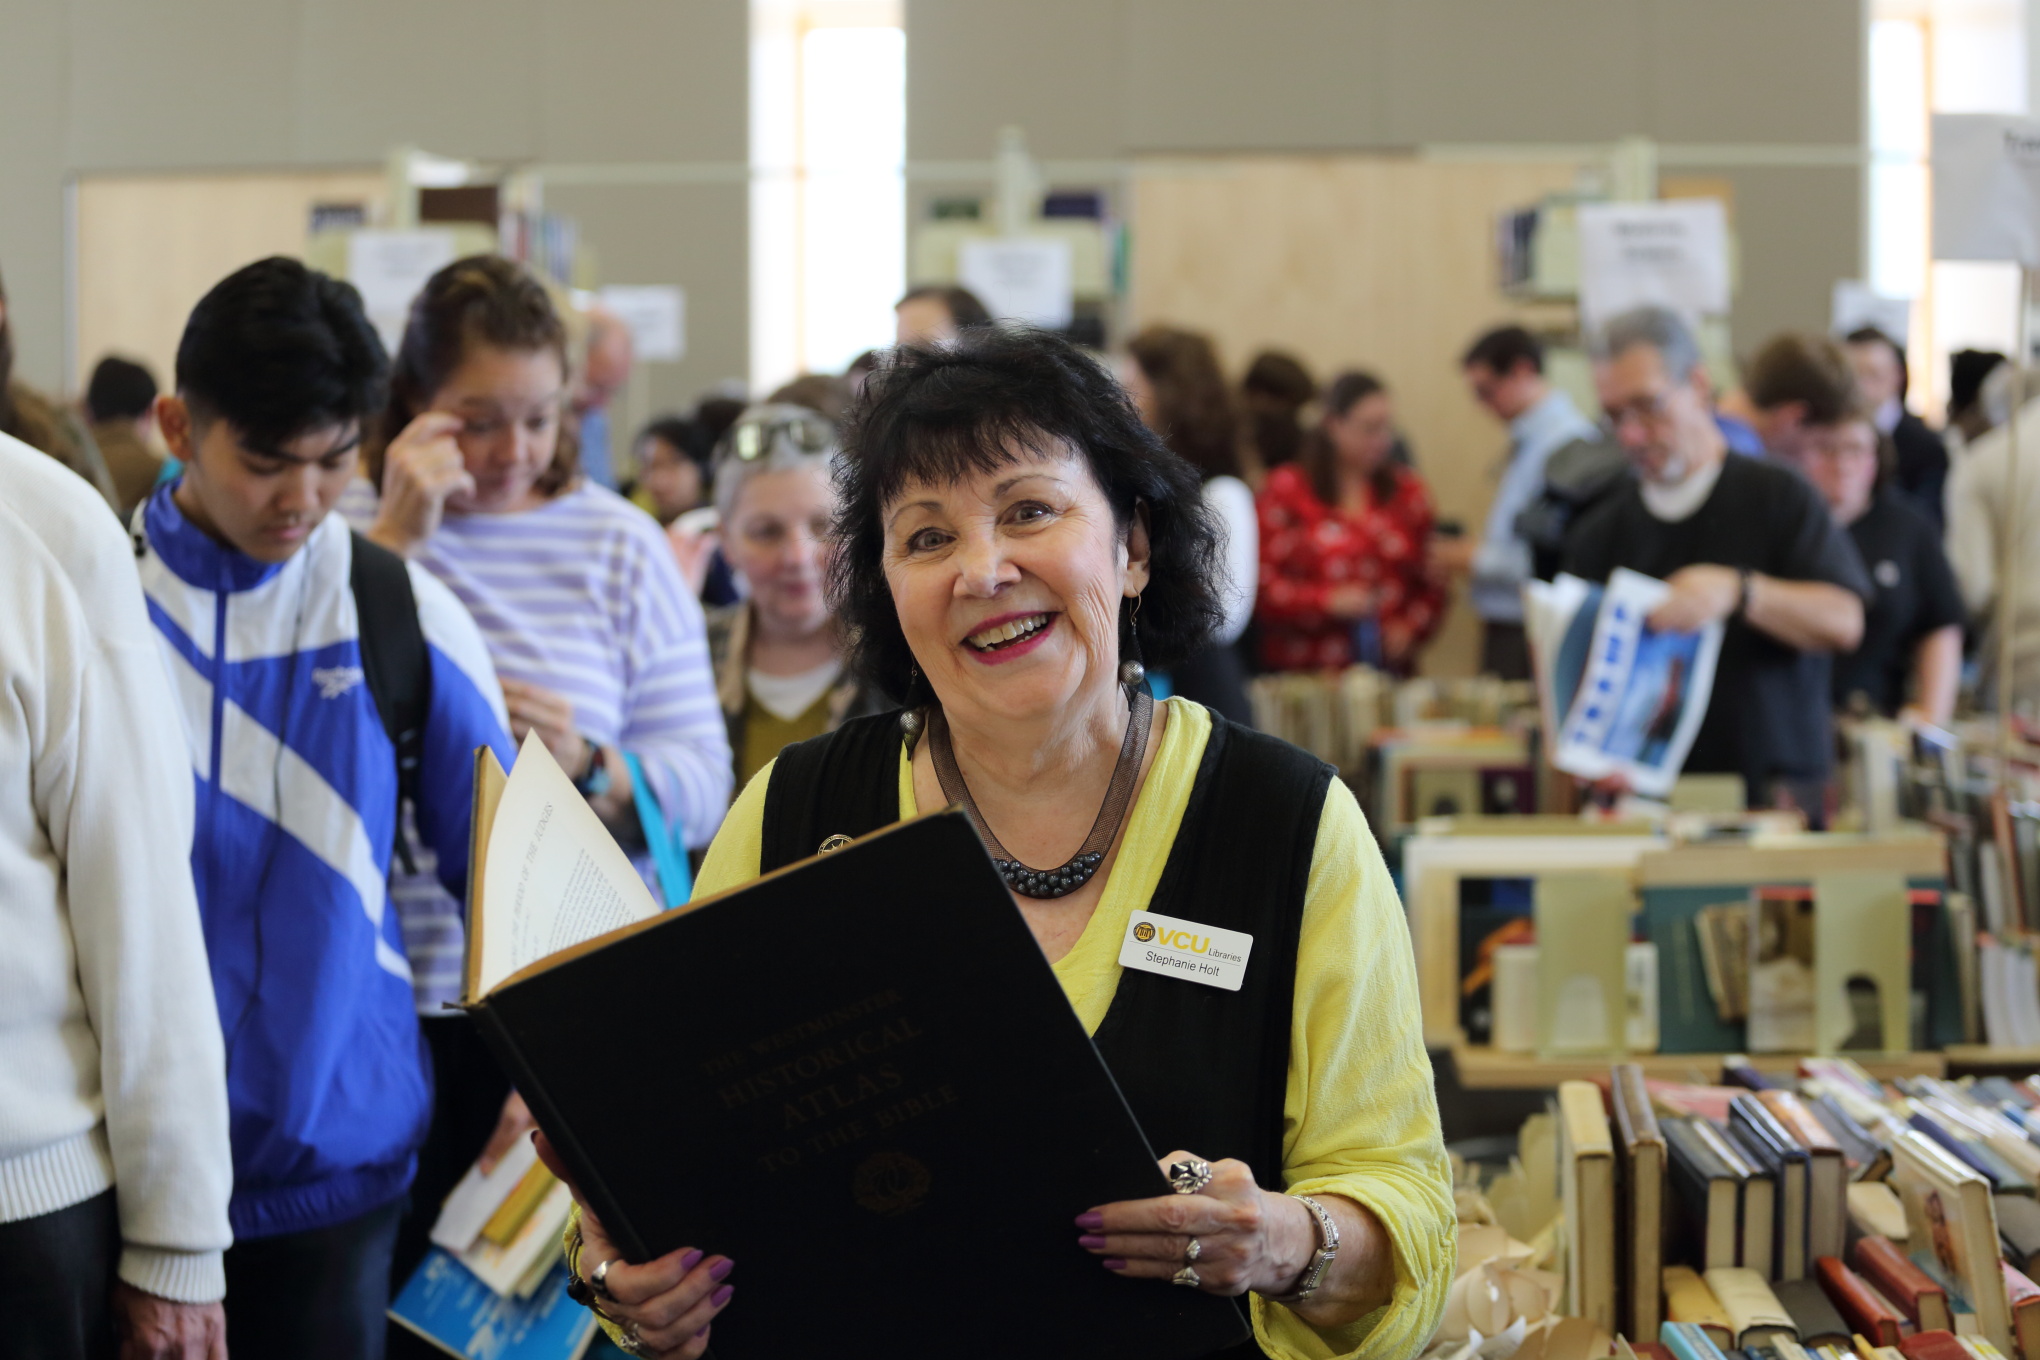 Friends of VCU Libraries Board member Stephanie Holt at the annual book sale